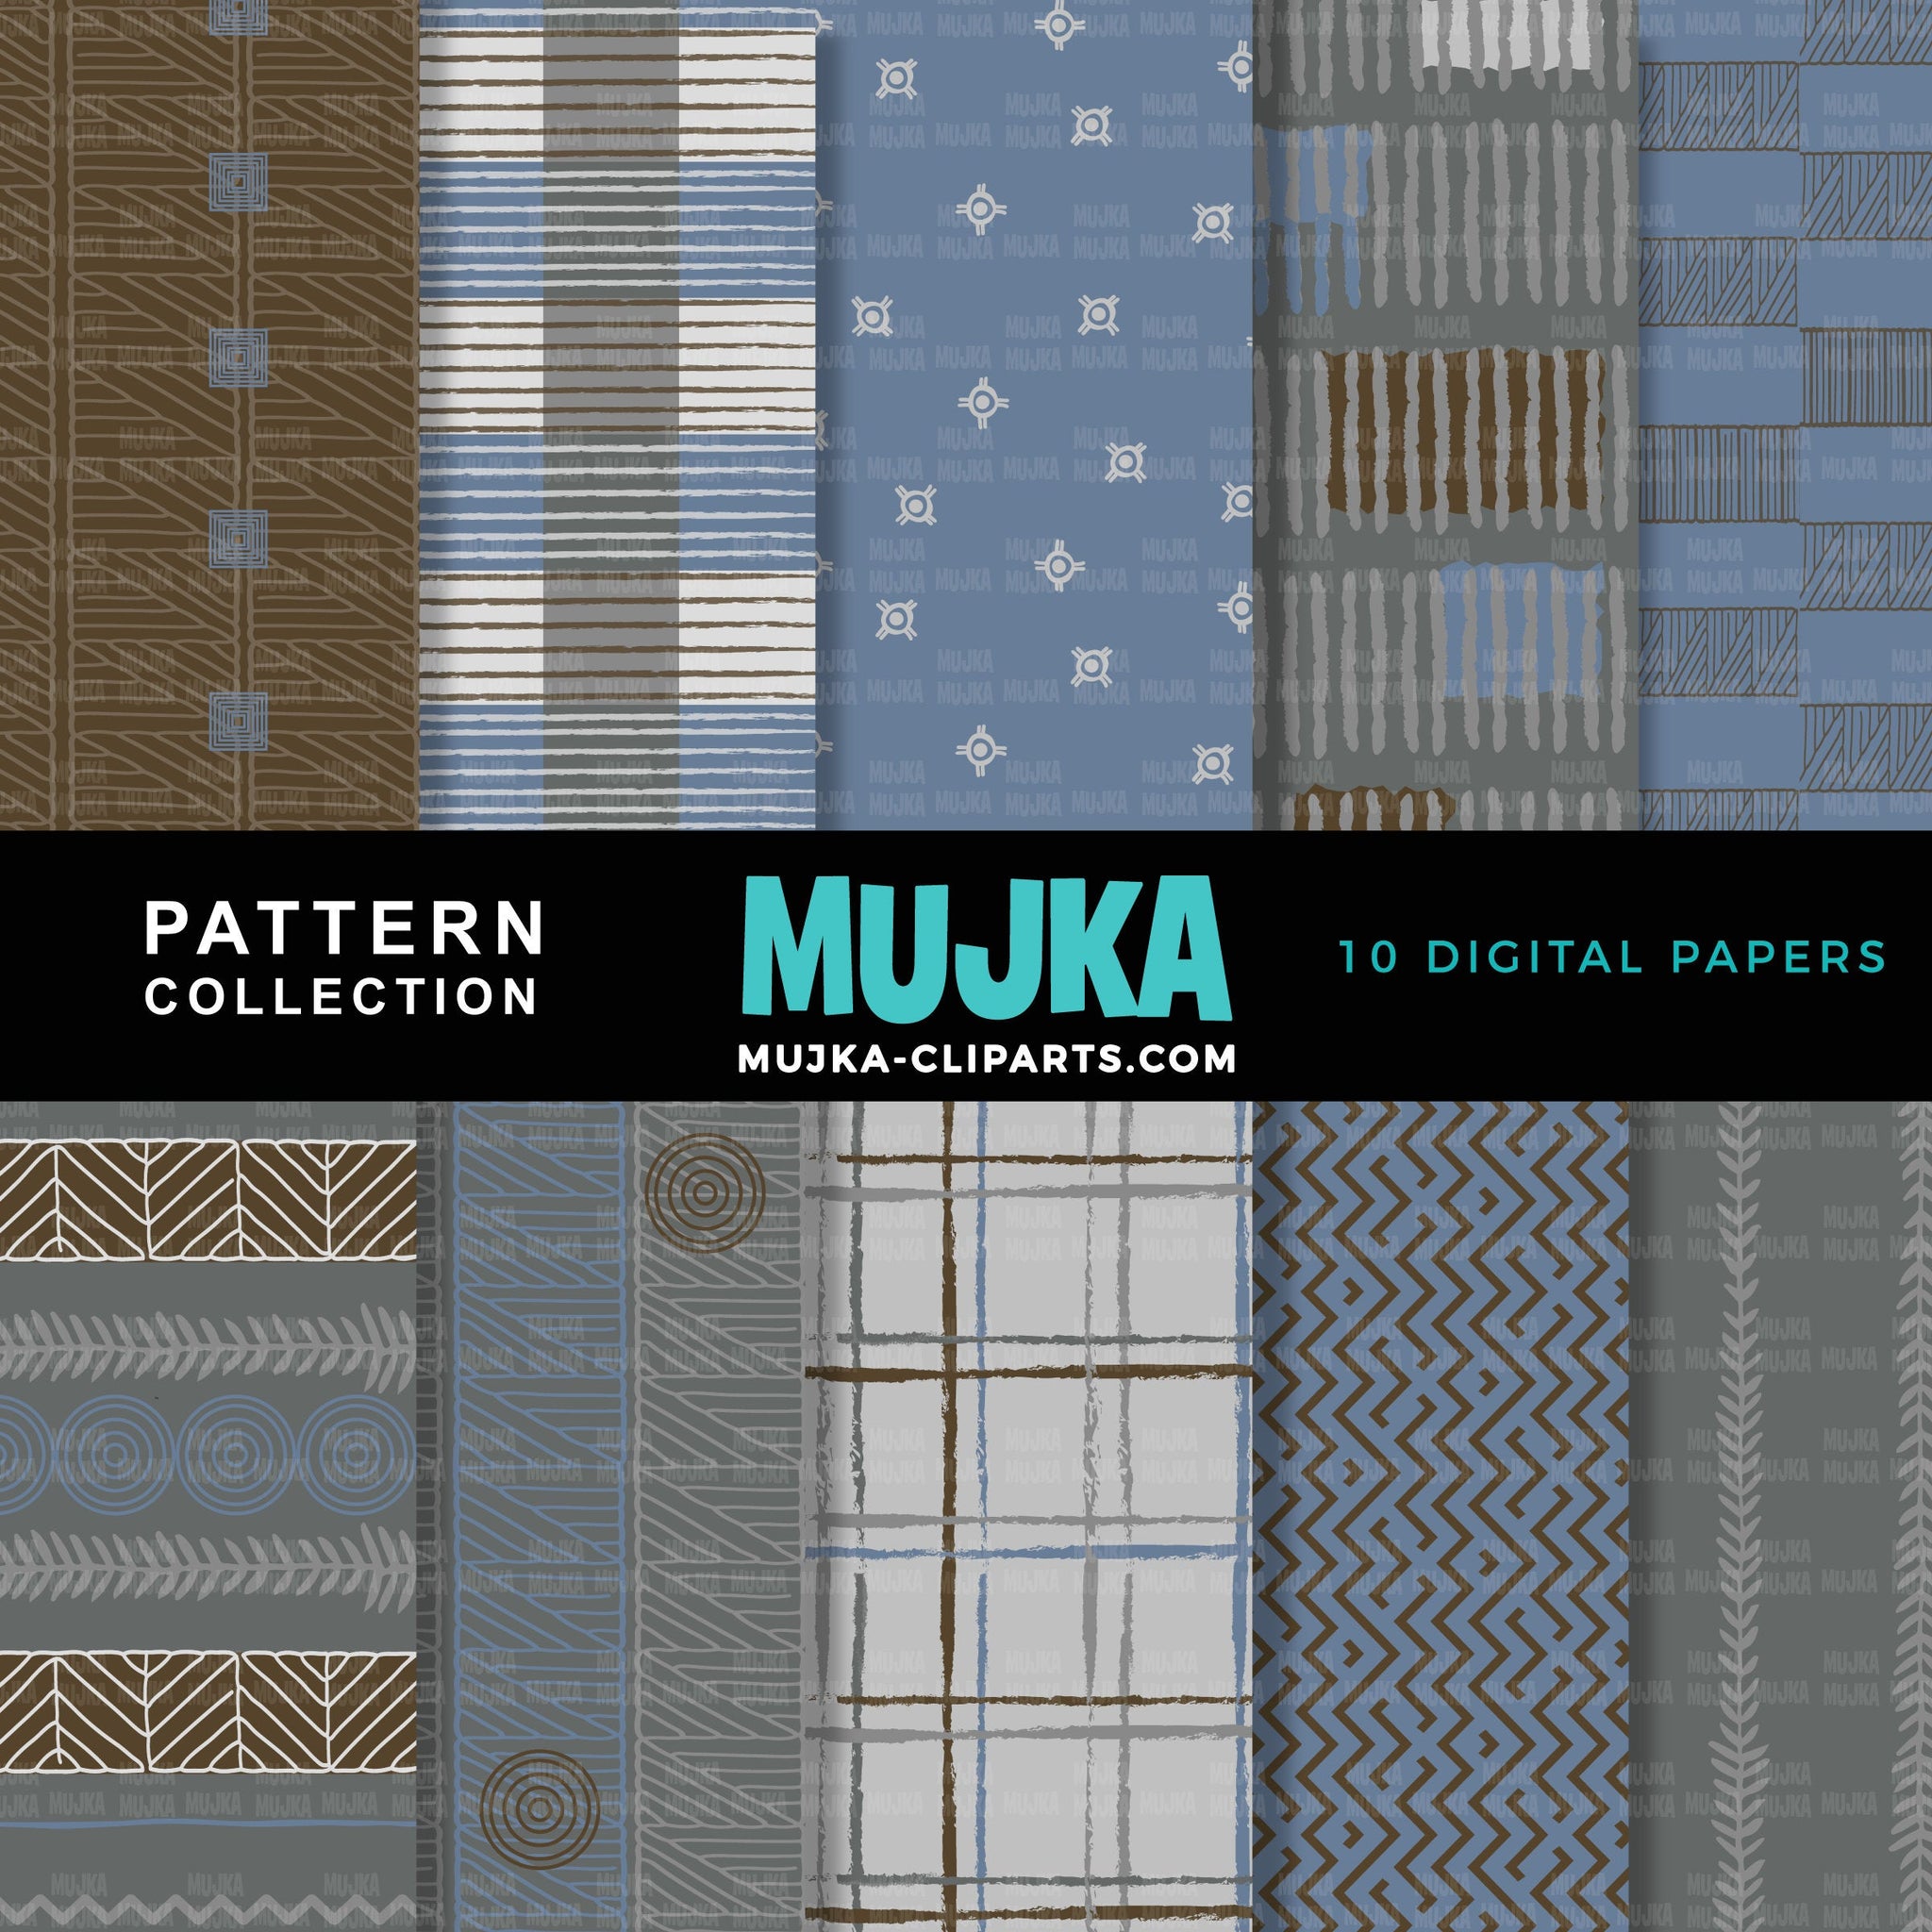 Masculine digital papers, men's digital patterns, seamless scrapbook papers, brown khaki gray digital papers, father's day, new year papers